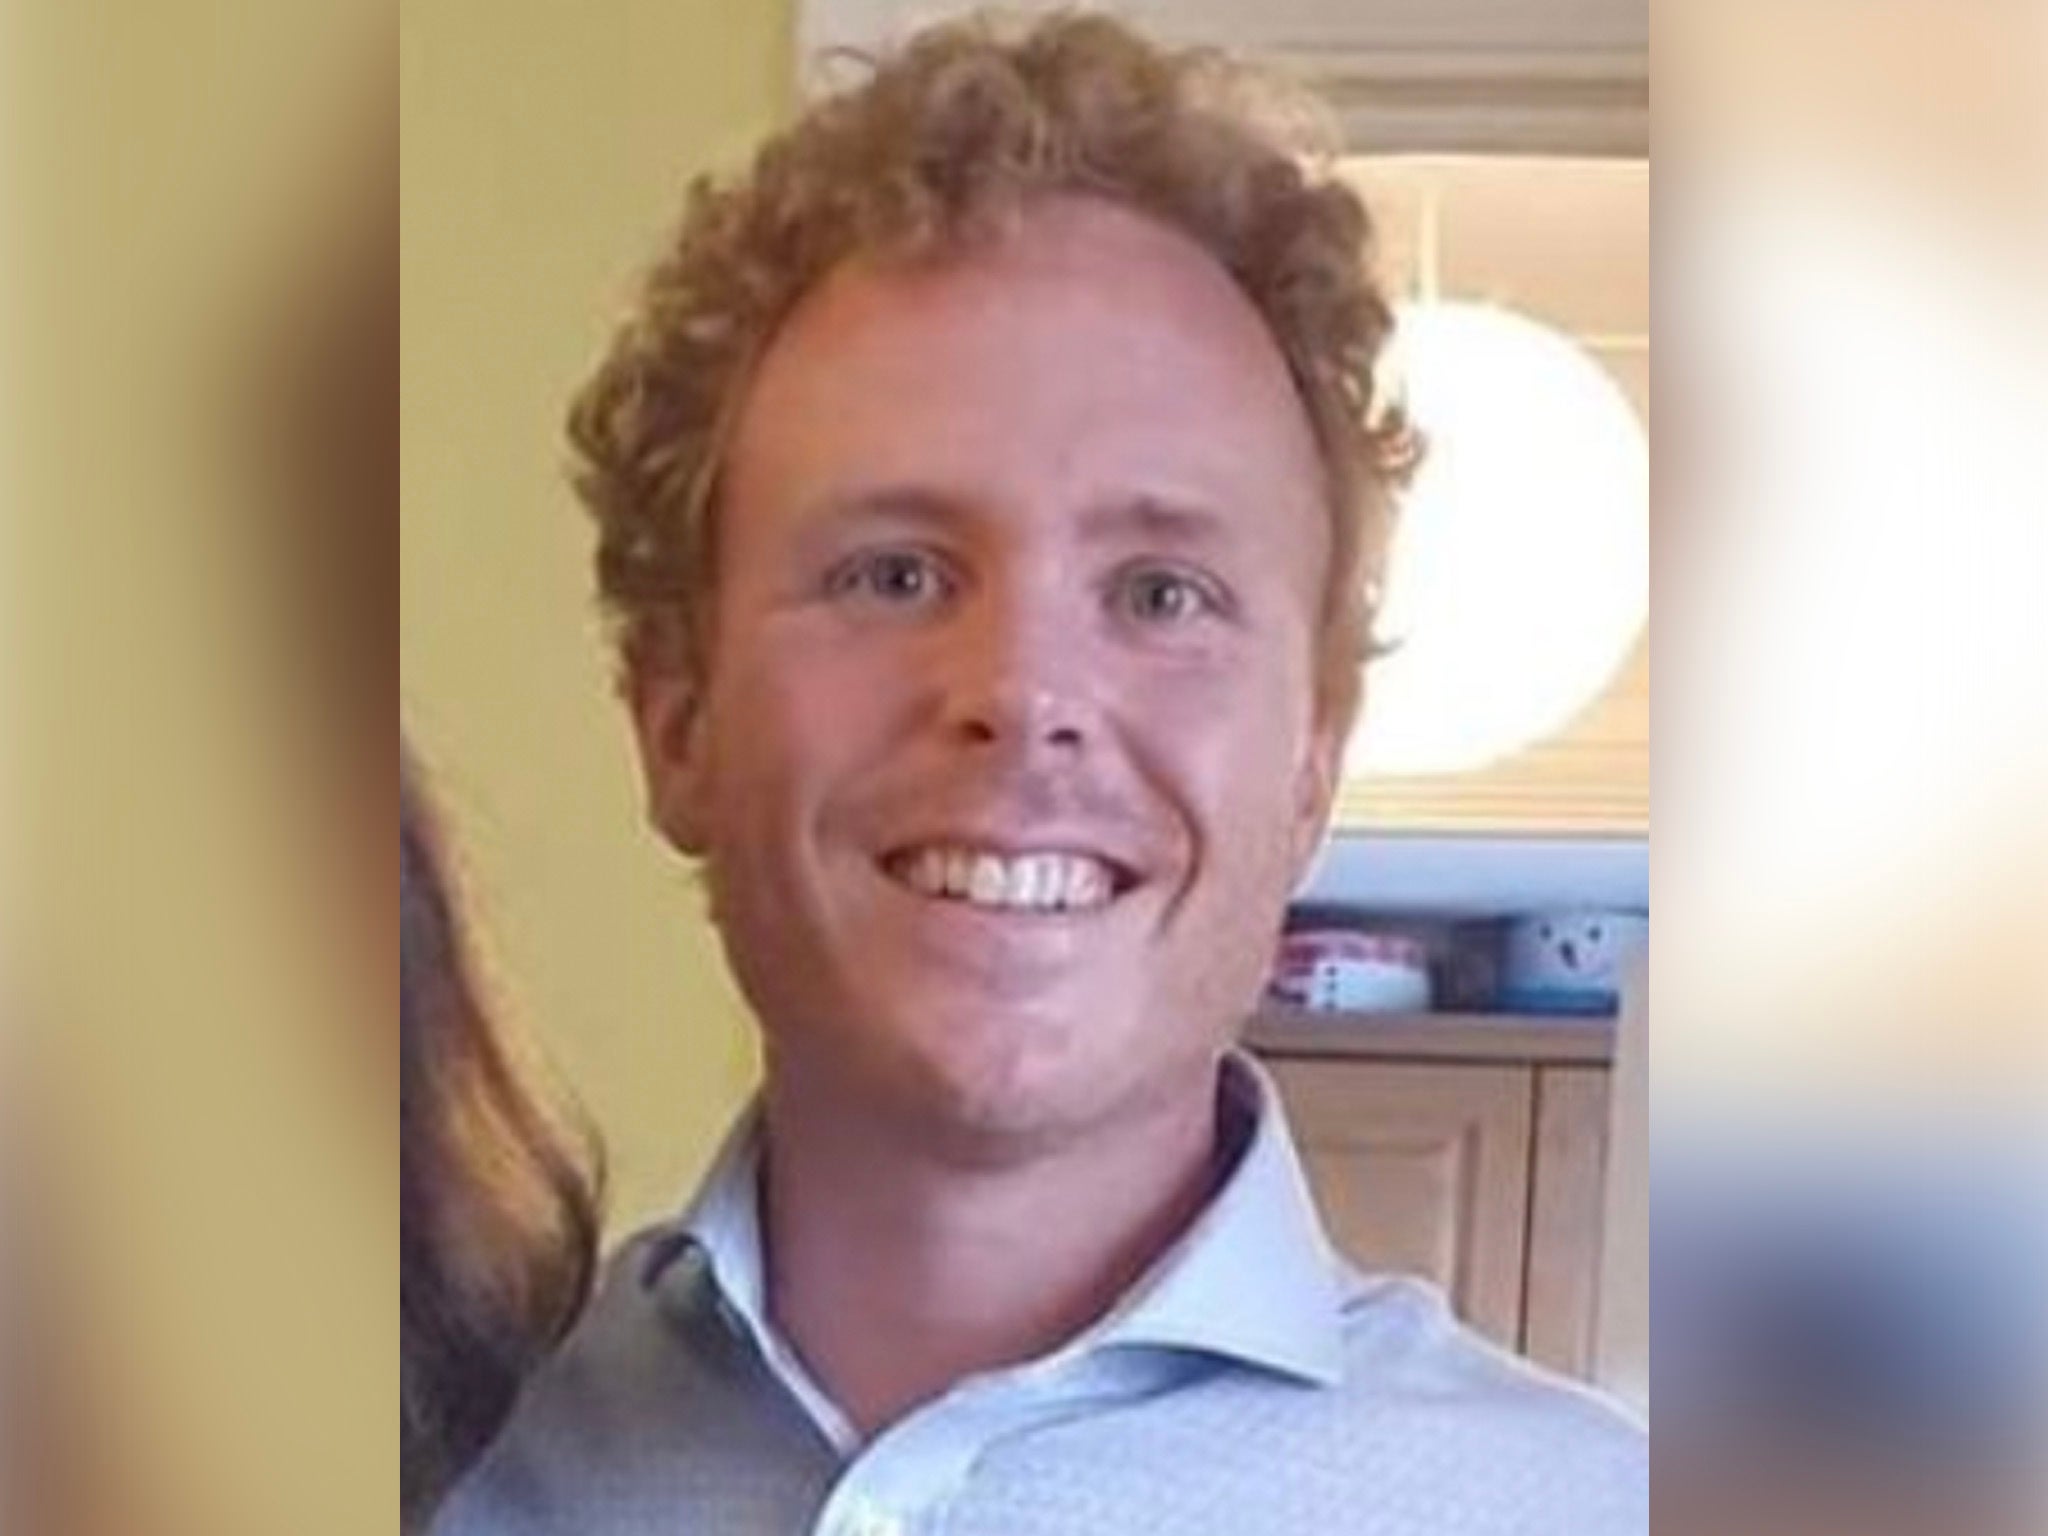 Matthew Boorman was one of three victims of the Tewkesbury knife attack